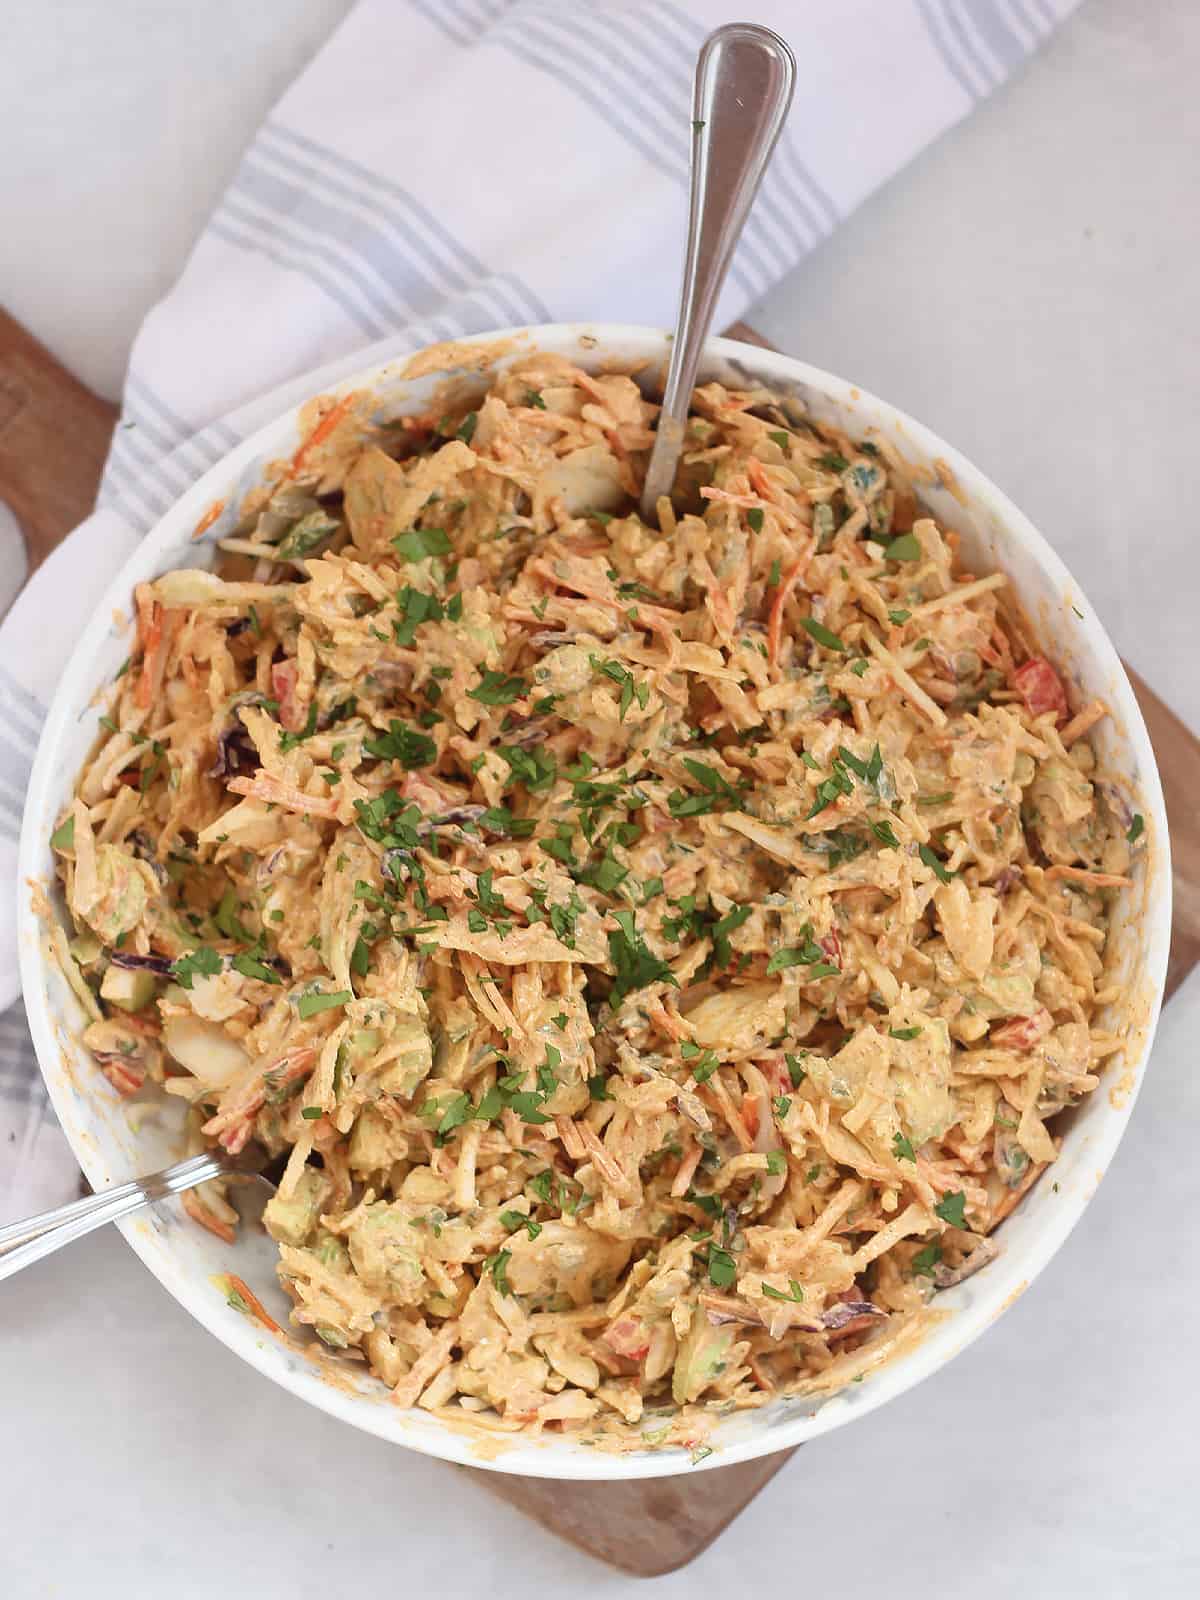 Creamy Tex-Mex coleslaw served in an bowl.